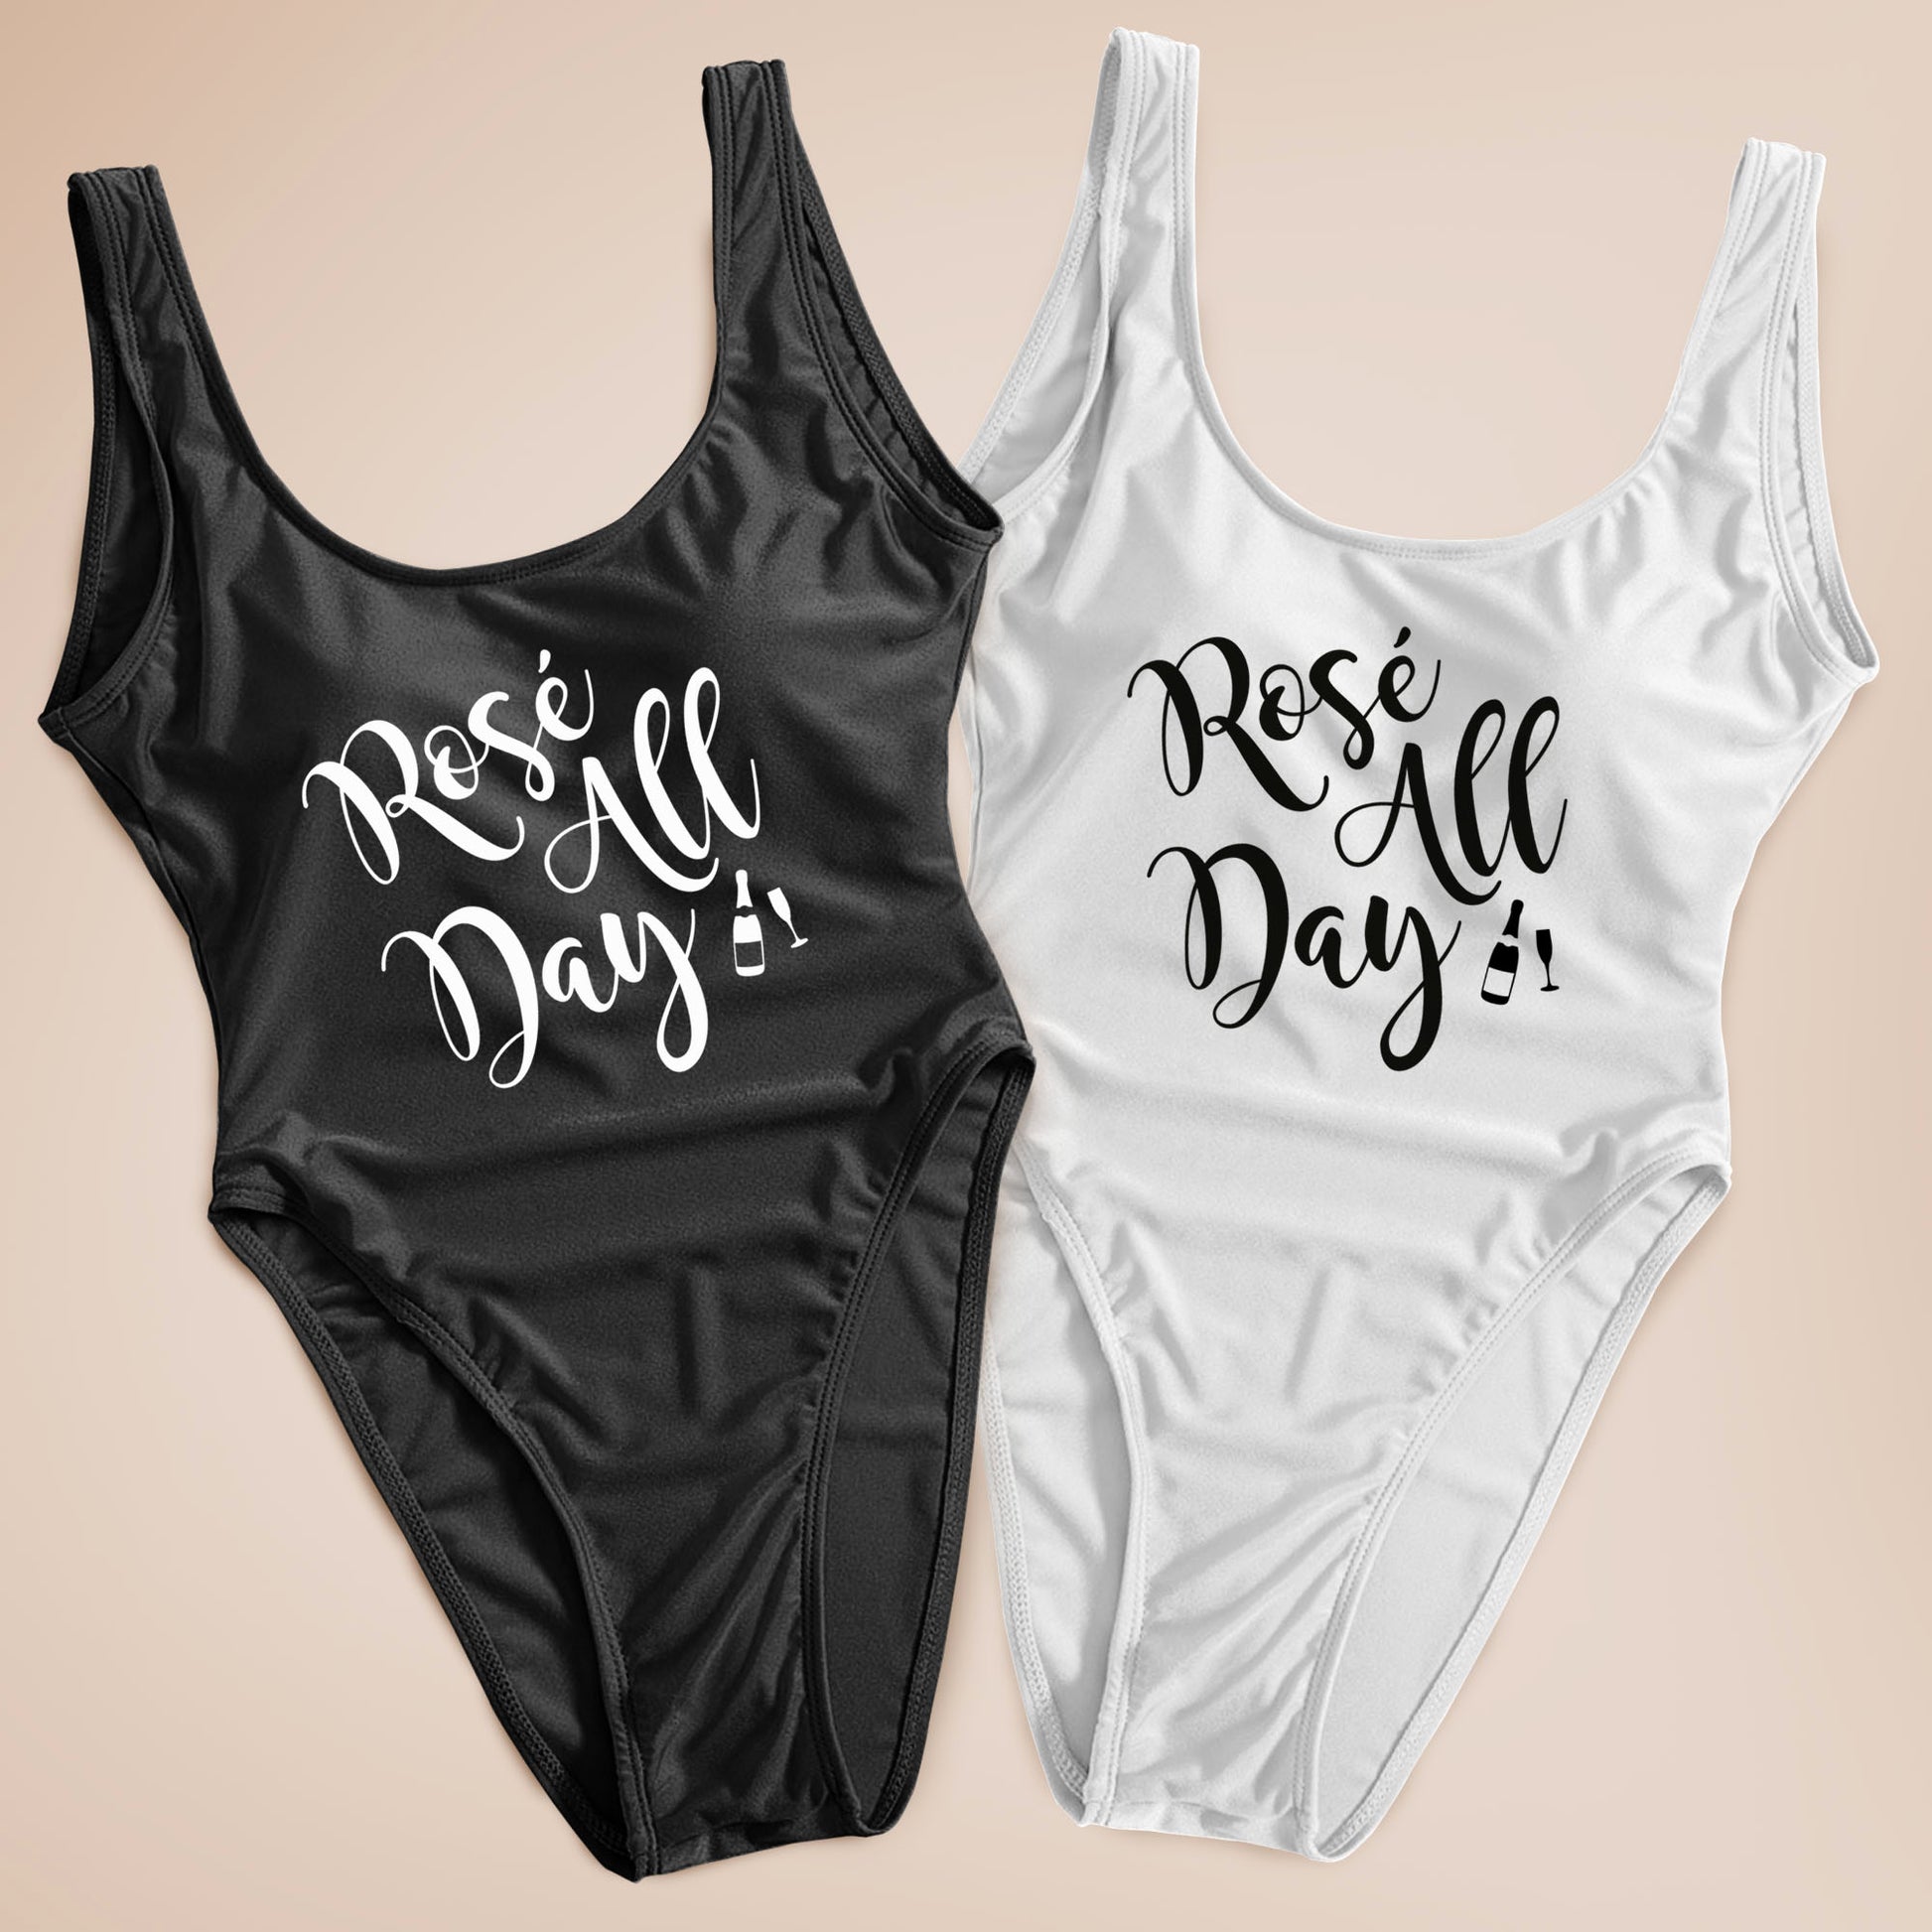 Rose All Day Bride Swimsuit